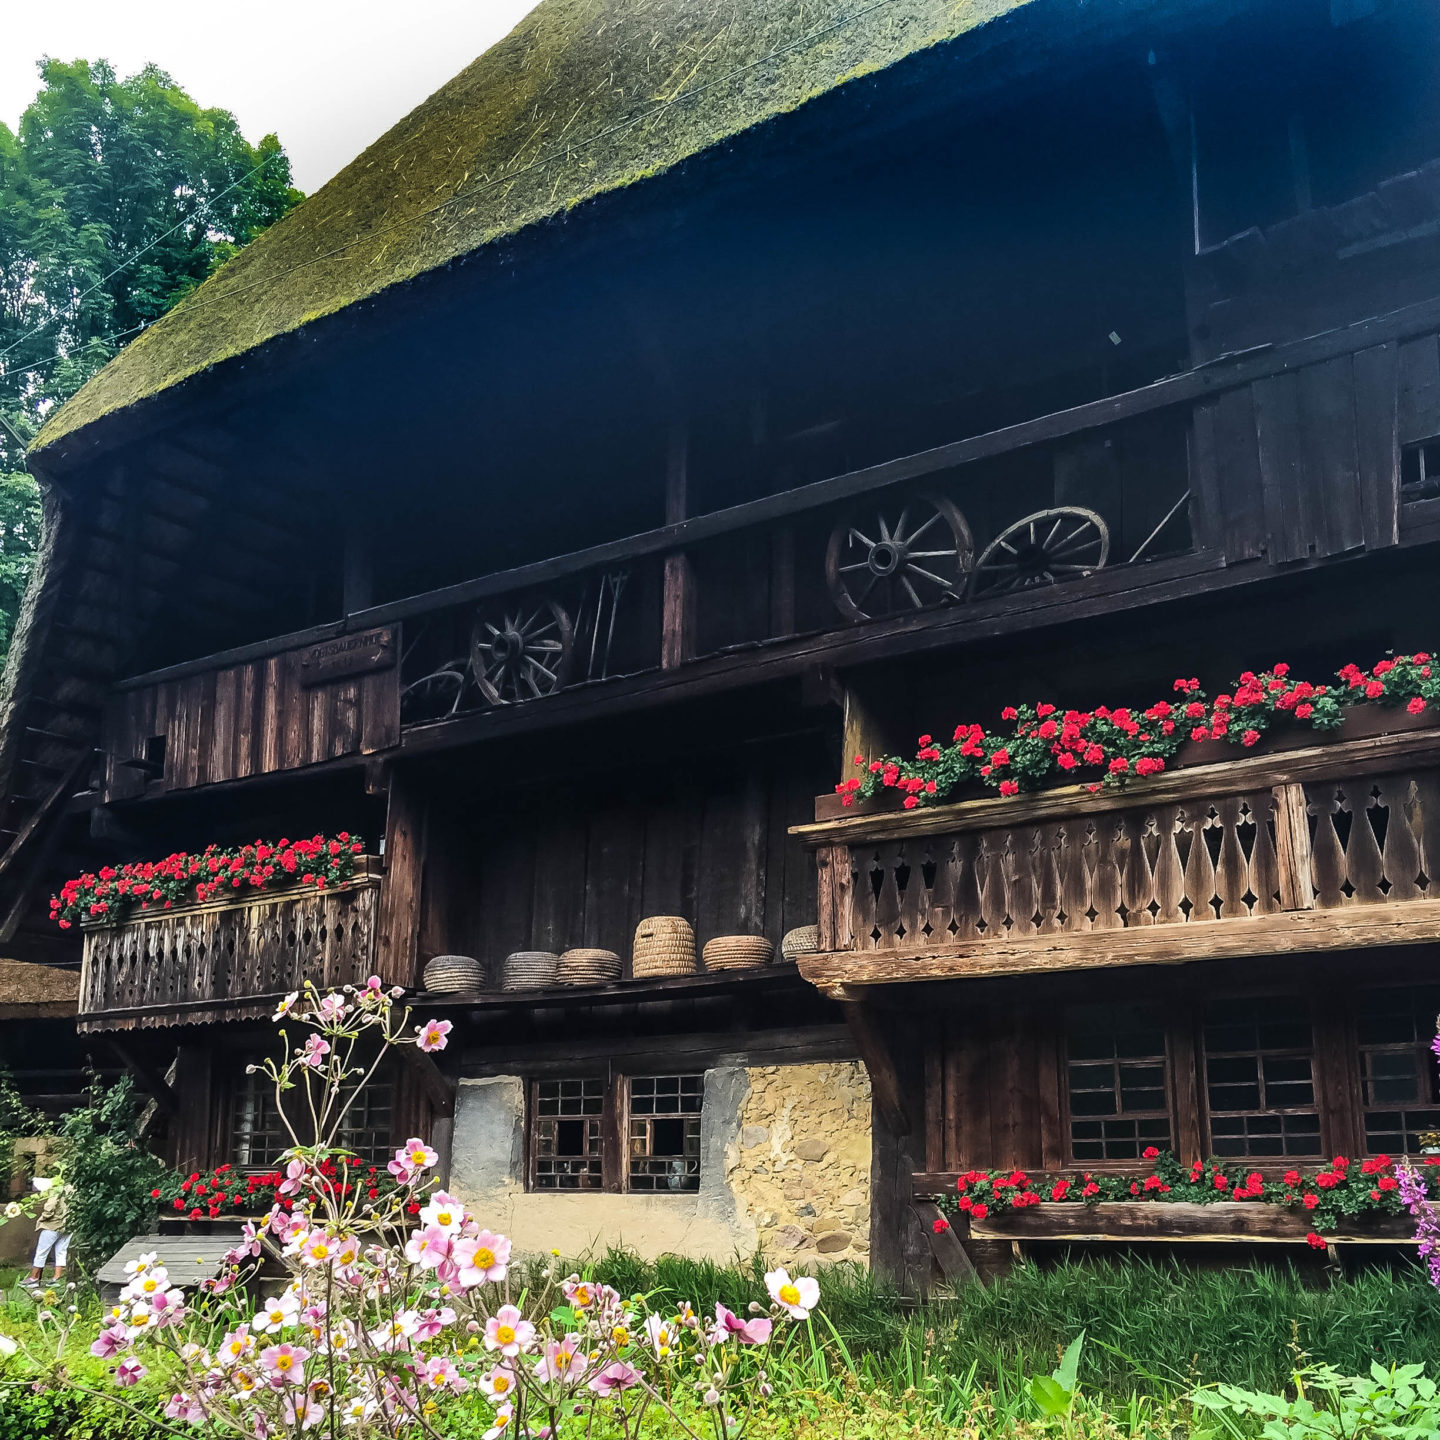 The outside of the oldest farmhouse at the Black Forest Open Air Museum. Note the beehives on the ledge!